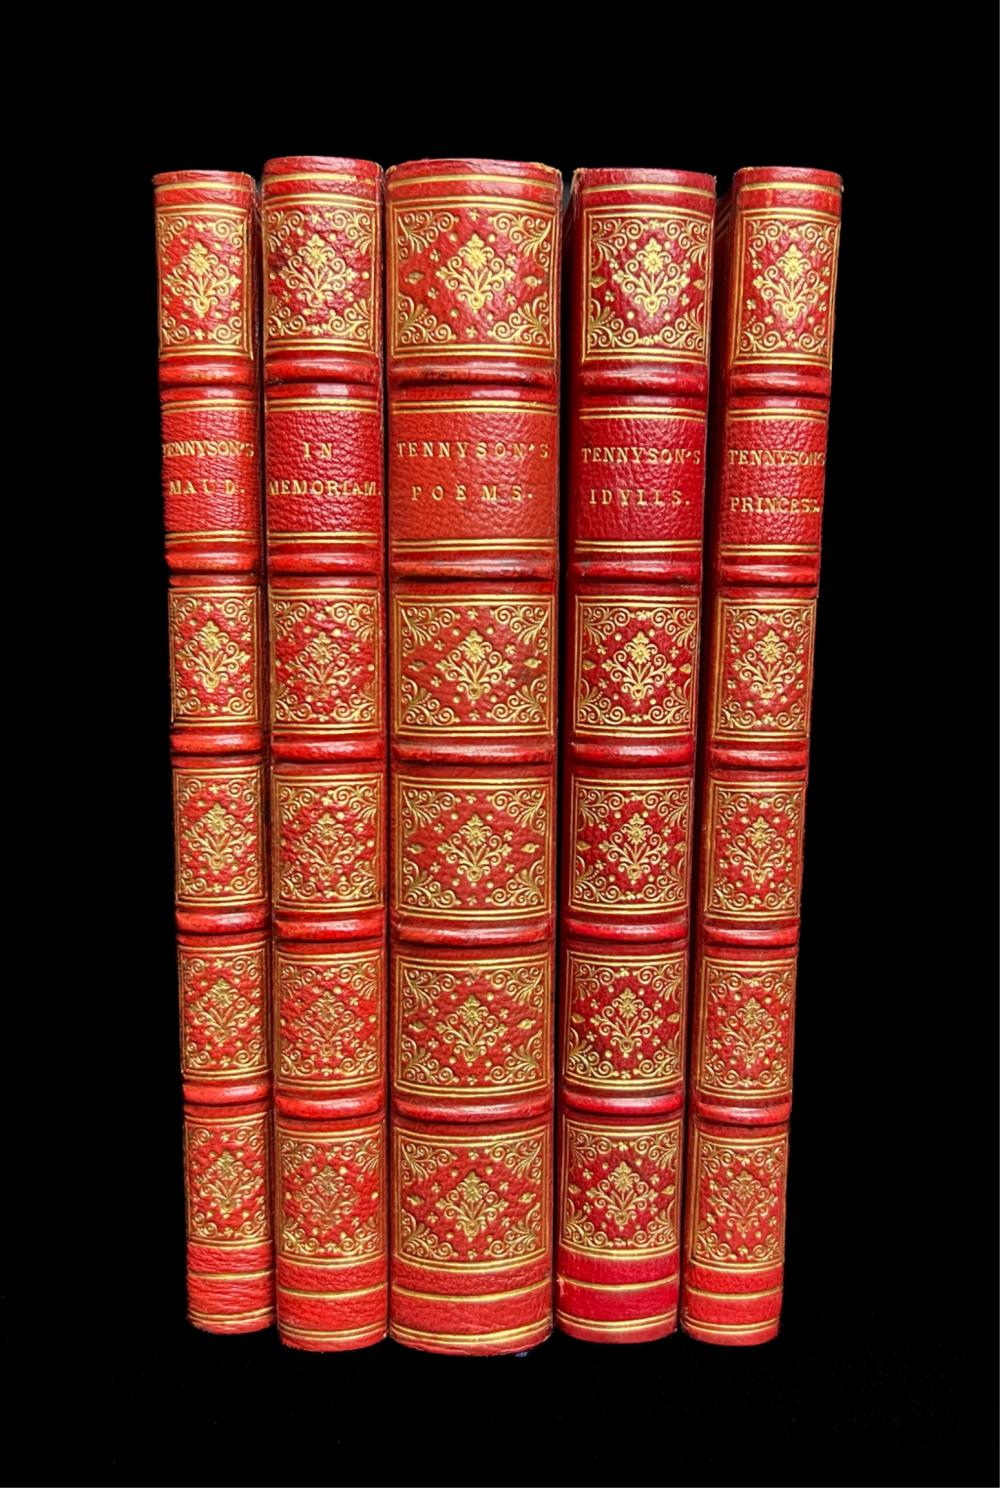 GROUP 5 BOOKS BY ALFRED TENNYSONTennyson s 2d438a